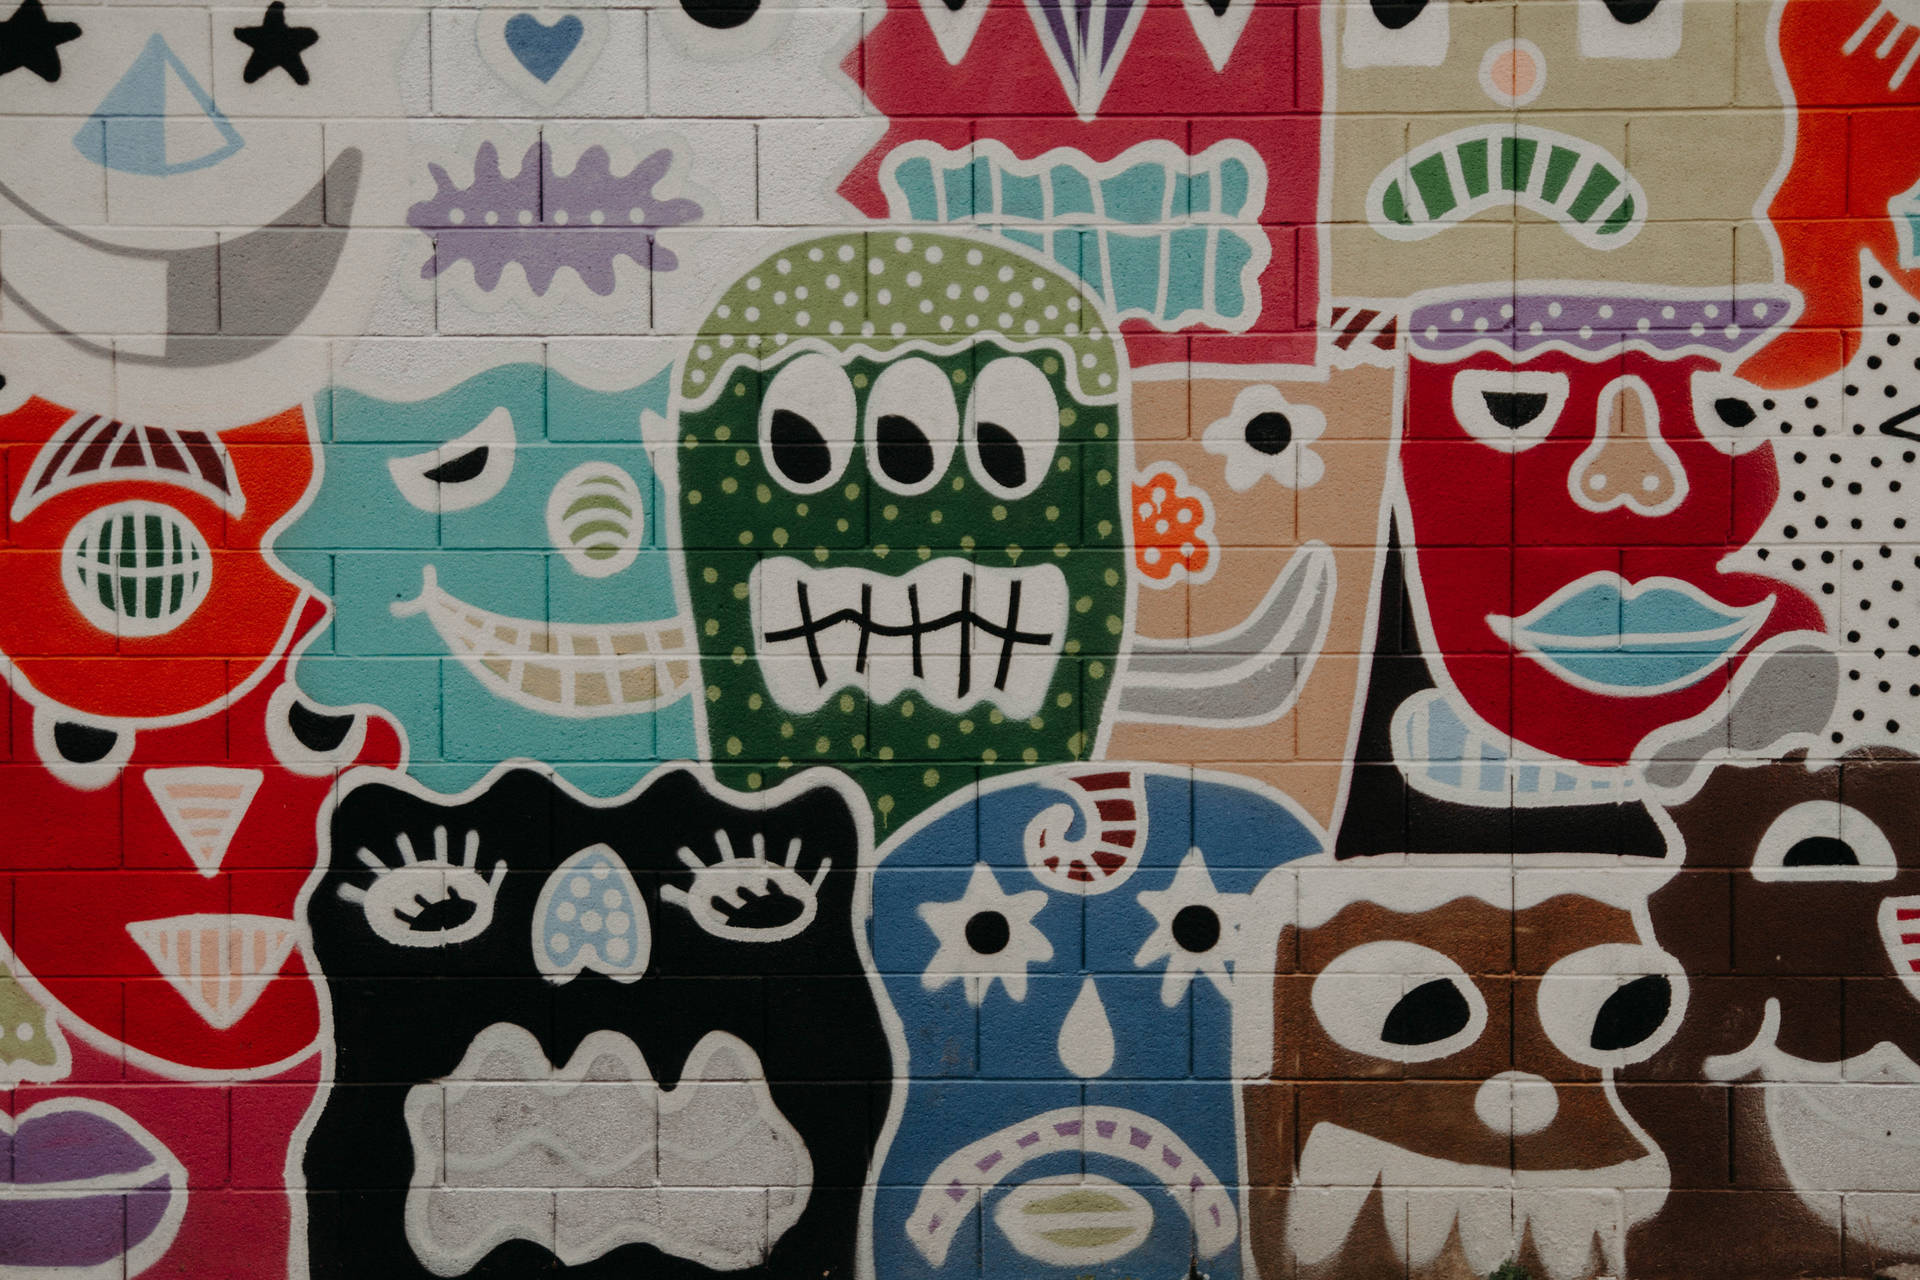 Graffiti Art with abstract faces showing uniqueness.